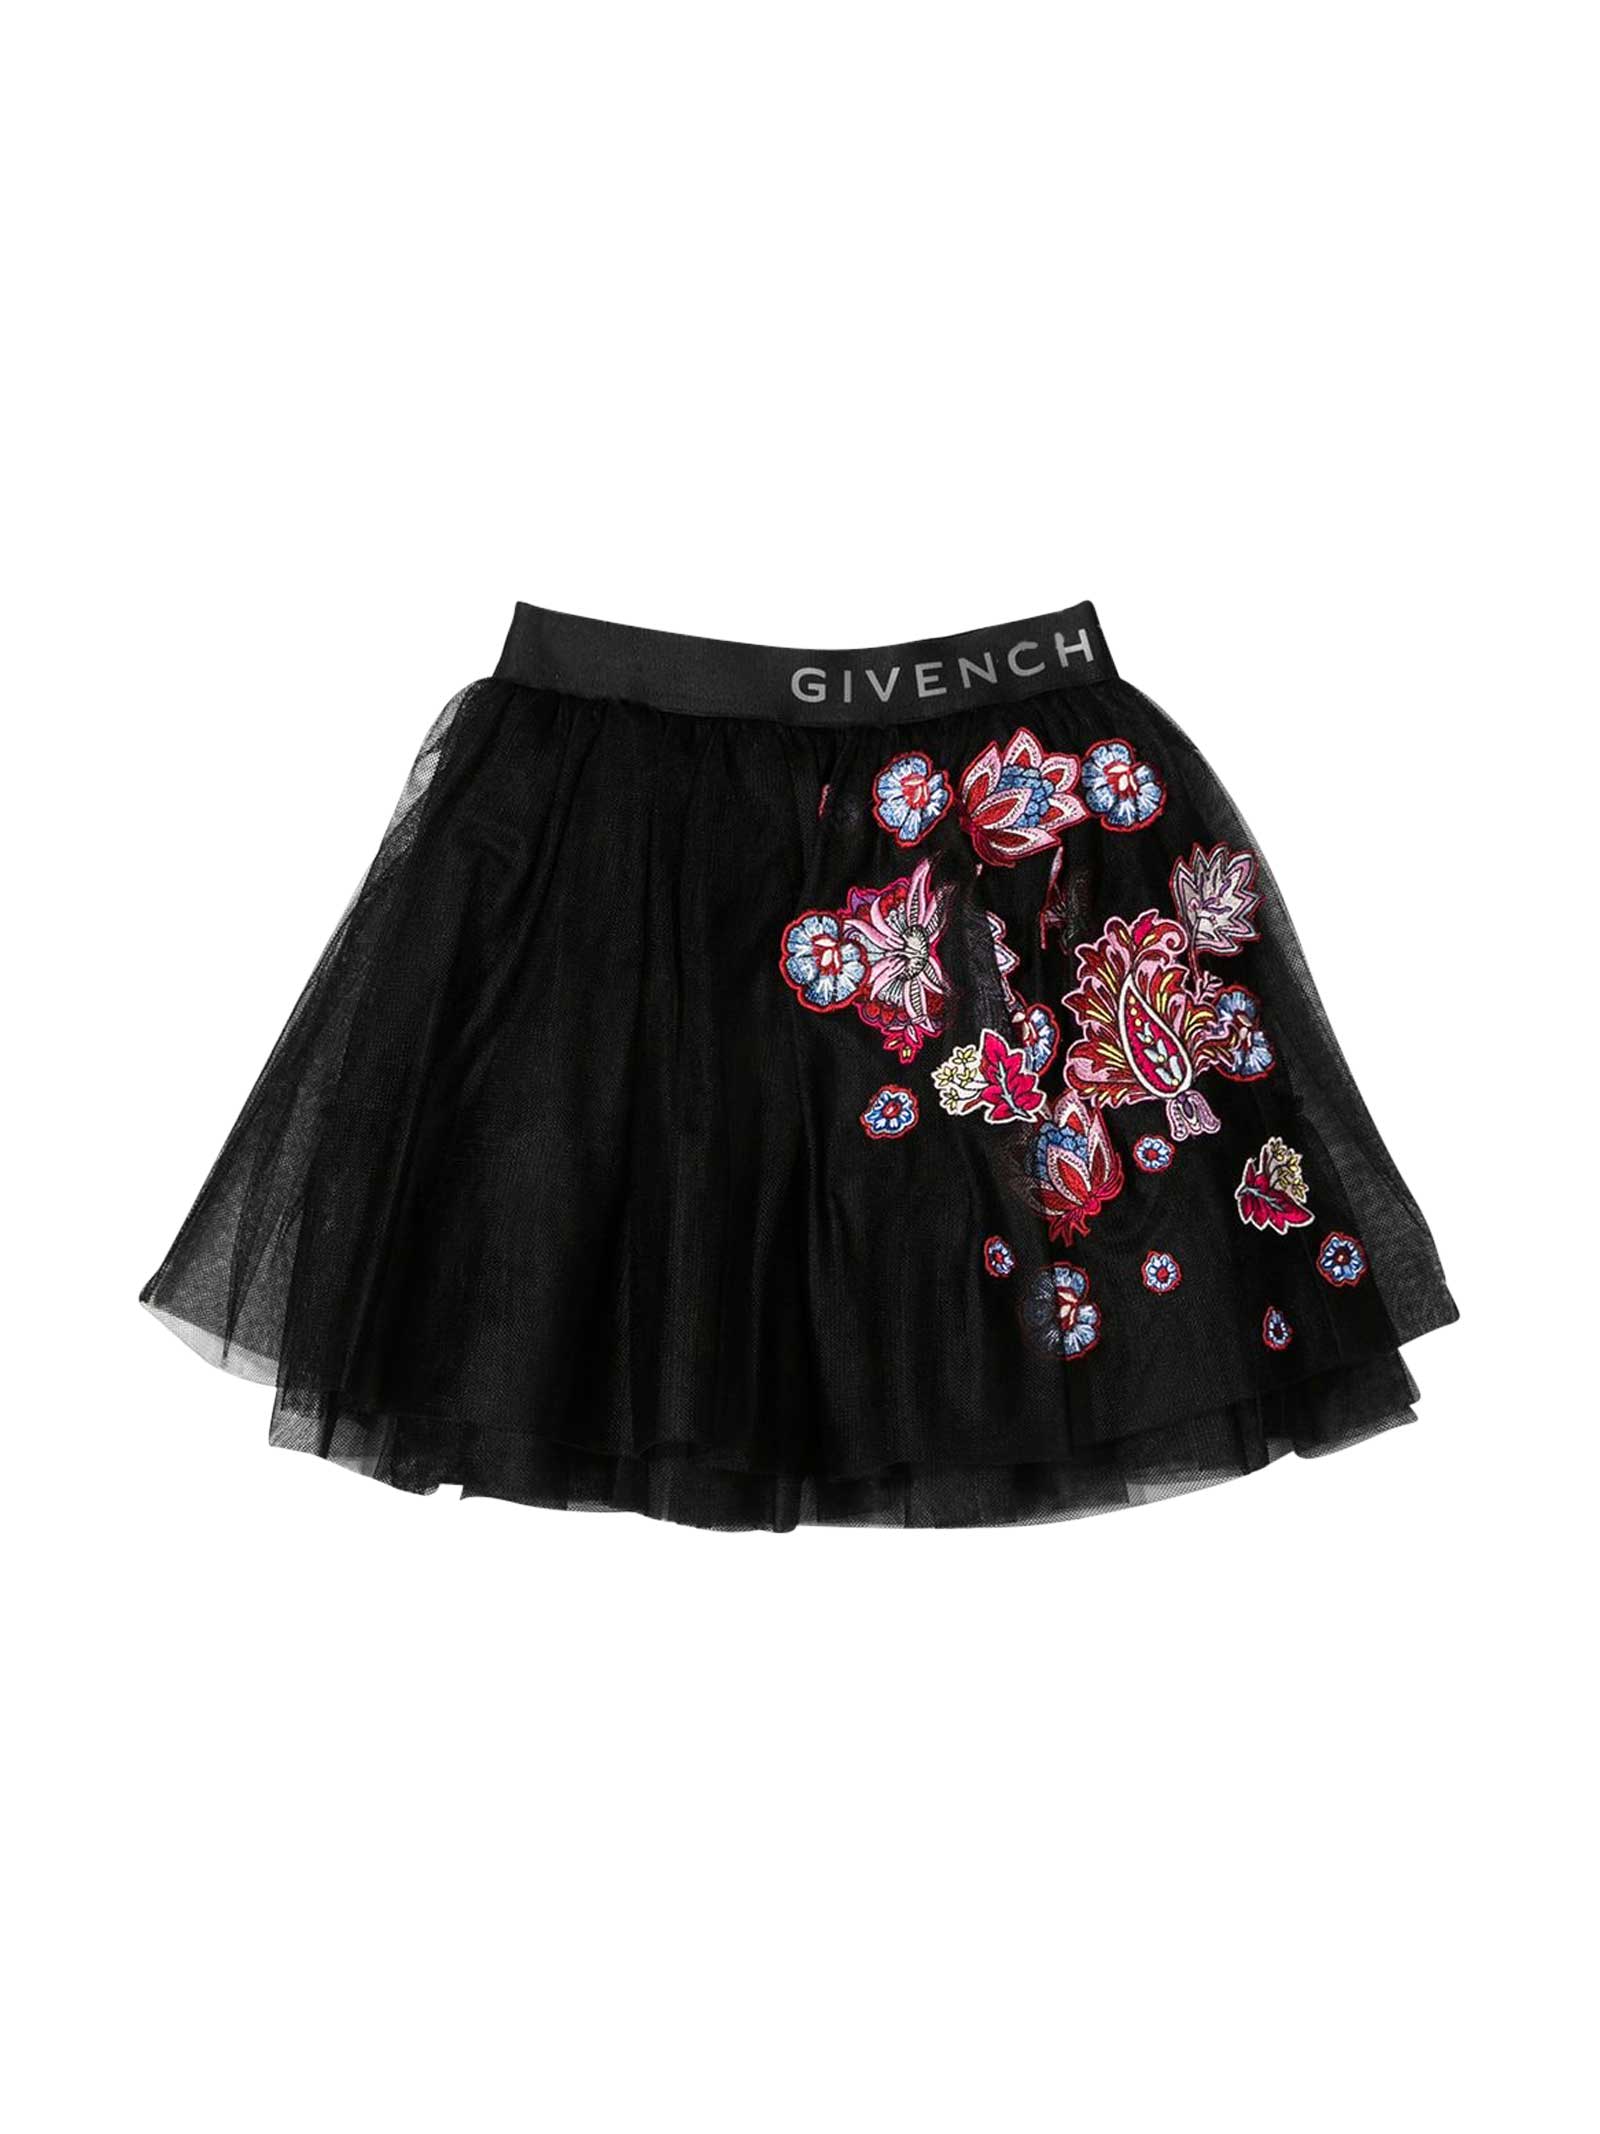 GIVENCHY BLACK SKIRT WITH PRINT,H13042 09B